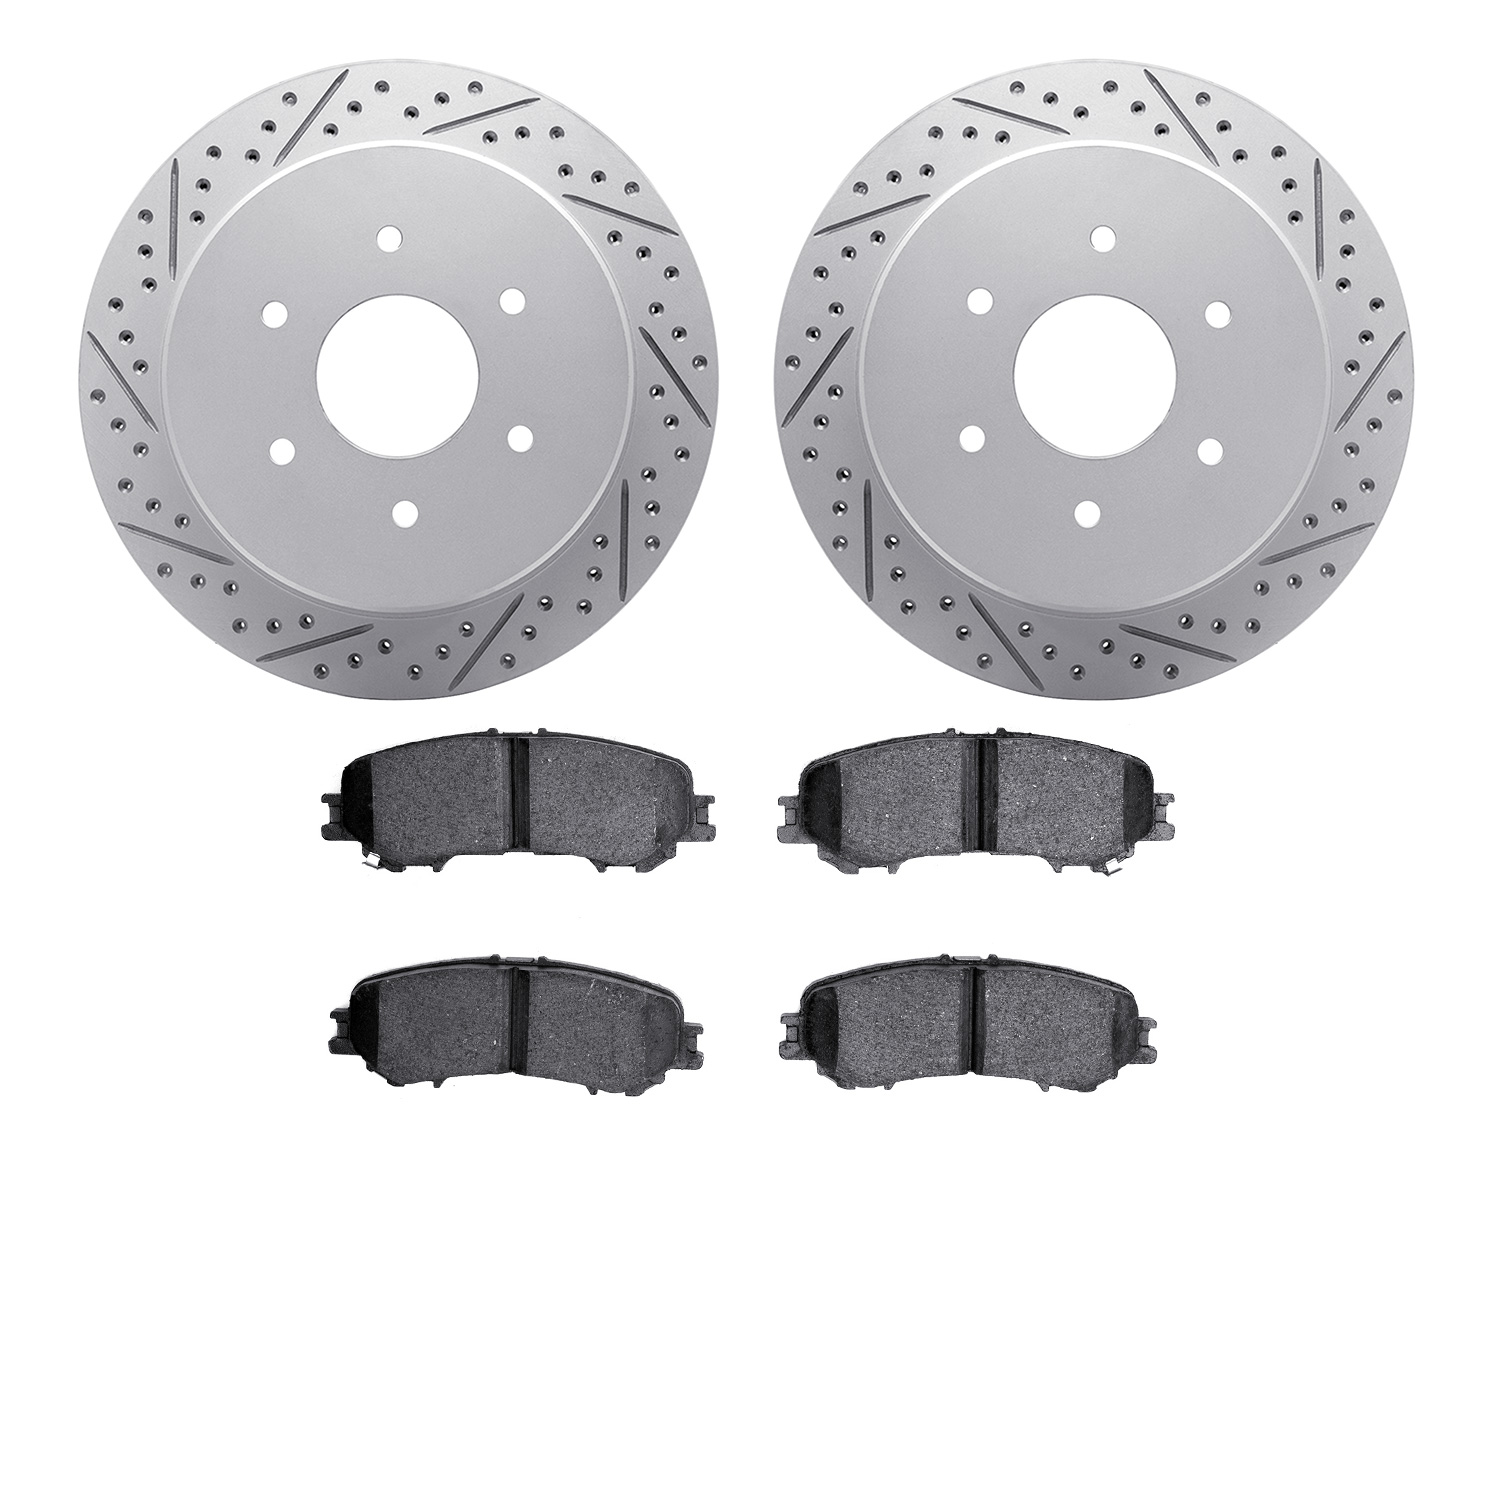 2402-67010 Geoperformance Drilled/Slotted Brake Rotors with Ultimate-Duty Brake Pads Kit, Fits Select Infiniti/Nissan, Position: